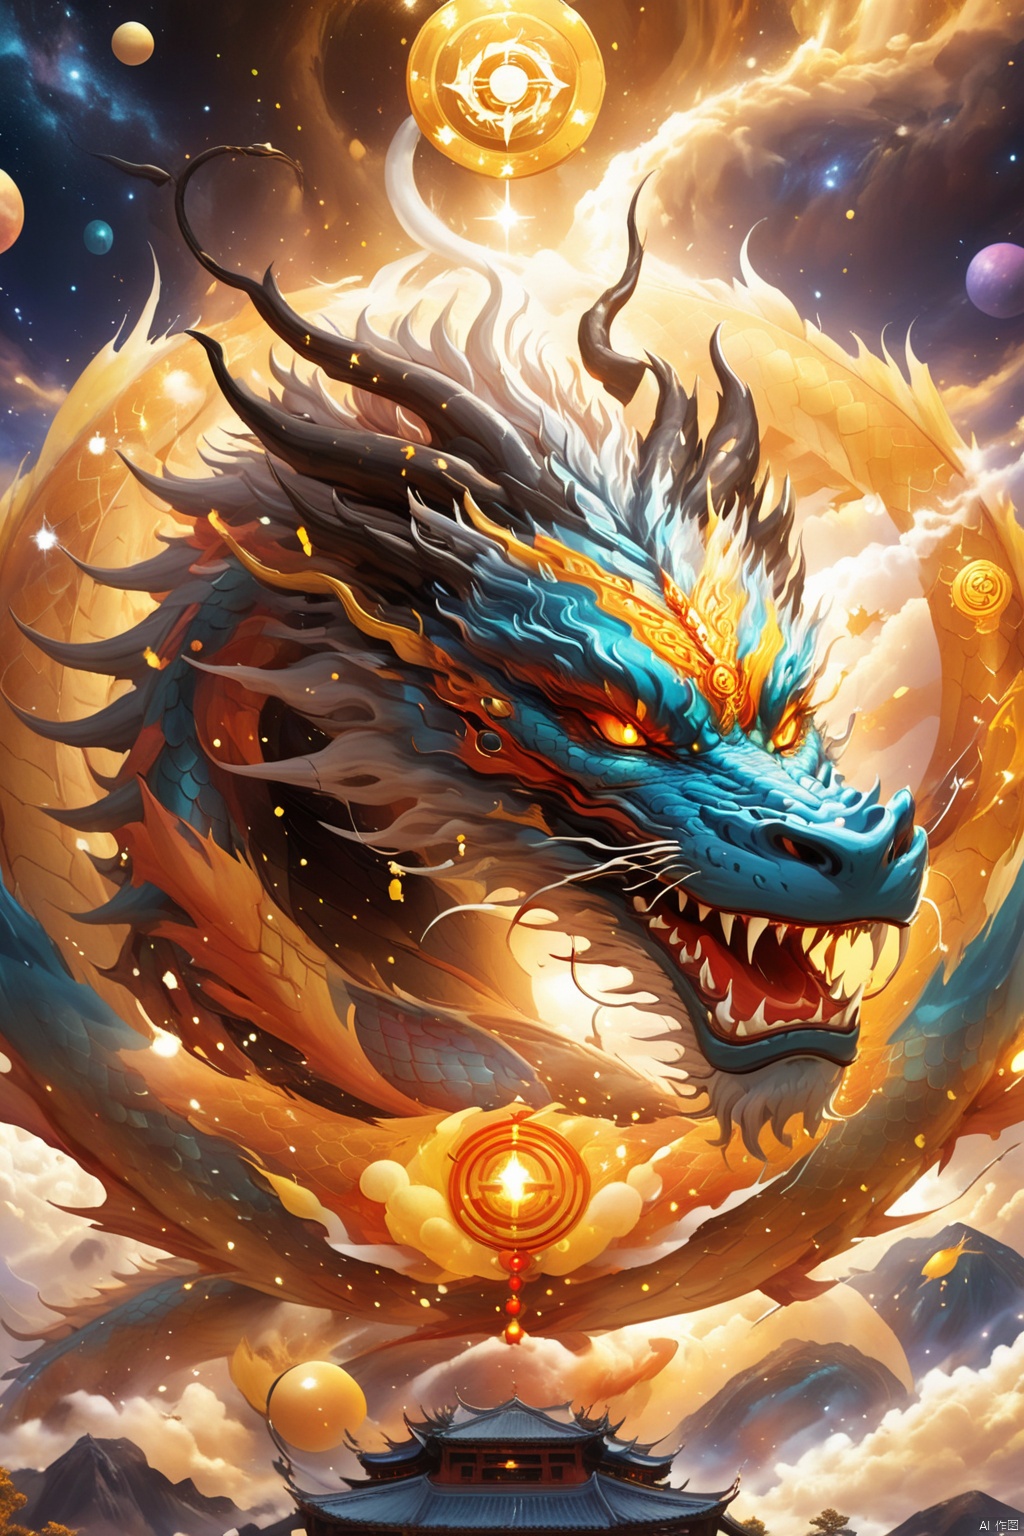  (Crypto Dragon King - Dragon with Five Claws: 1.48), (Dragon horn, dragon body, dragon tail), (mysterious halo: 1.36), (Star vortex, star river, star ring), travel in the universe, use digital crypto magic, guard the digital field, (cross-chain information: 1.24), (digital currency: 1.5), encryption algorithm, space-time light particles, (star vortex, star river, star ring), ultra HD, super detail, epic shock, visual art, surreal, mythological legend style, God beast, BJ_Sacred_beast